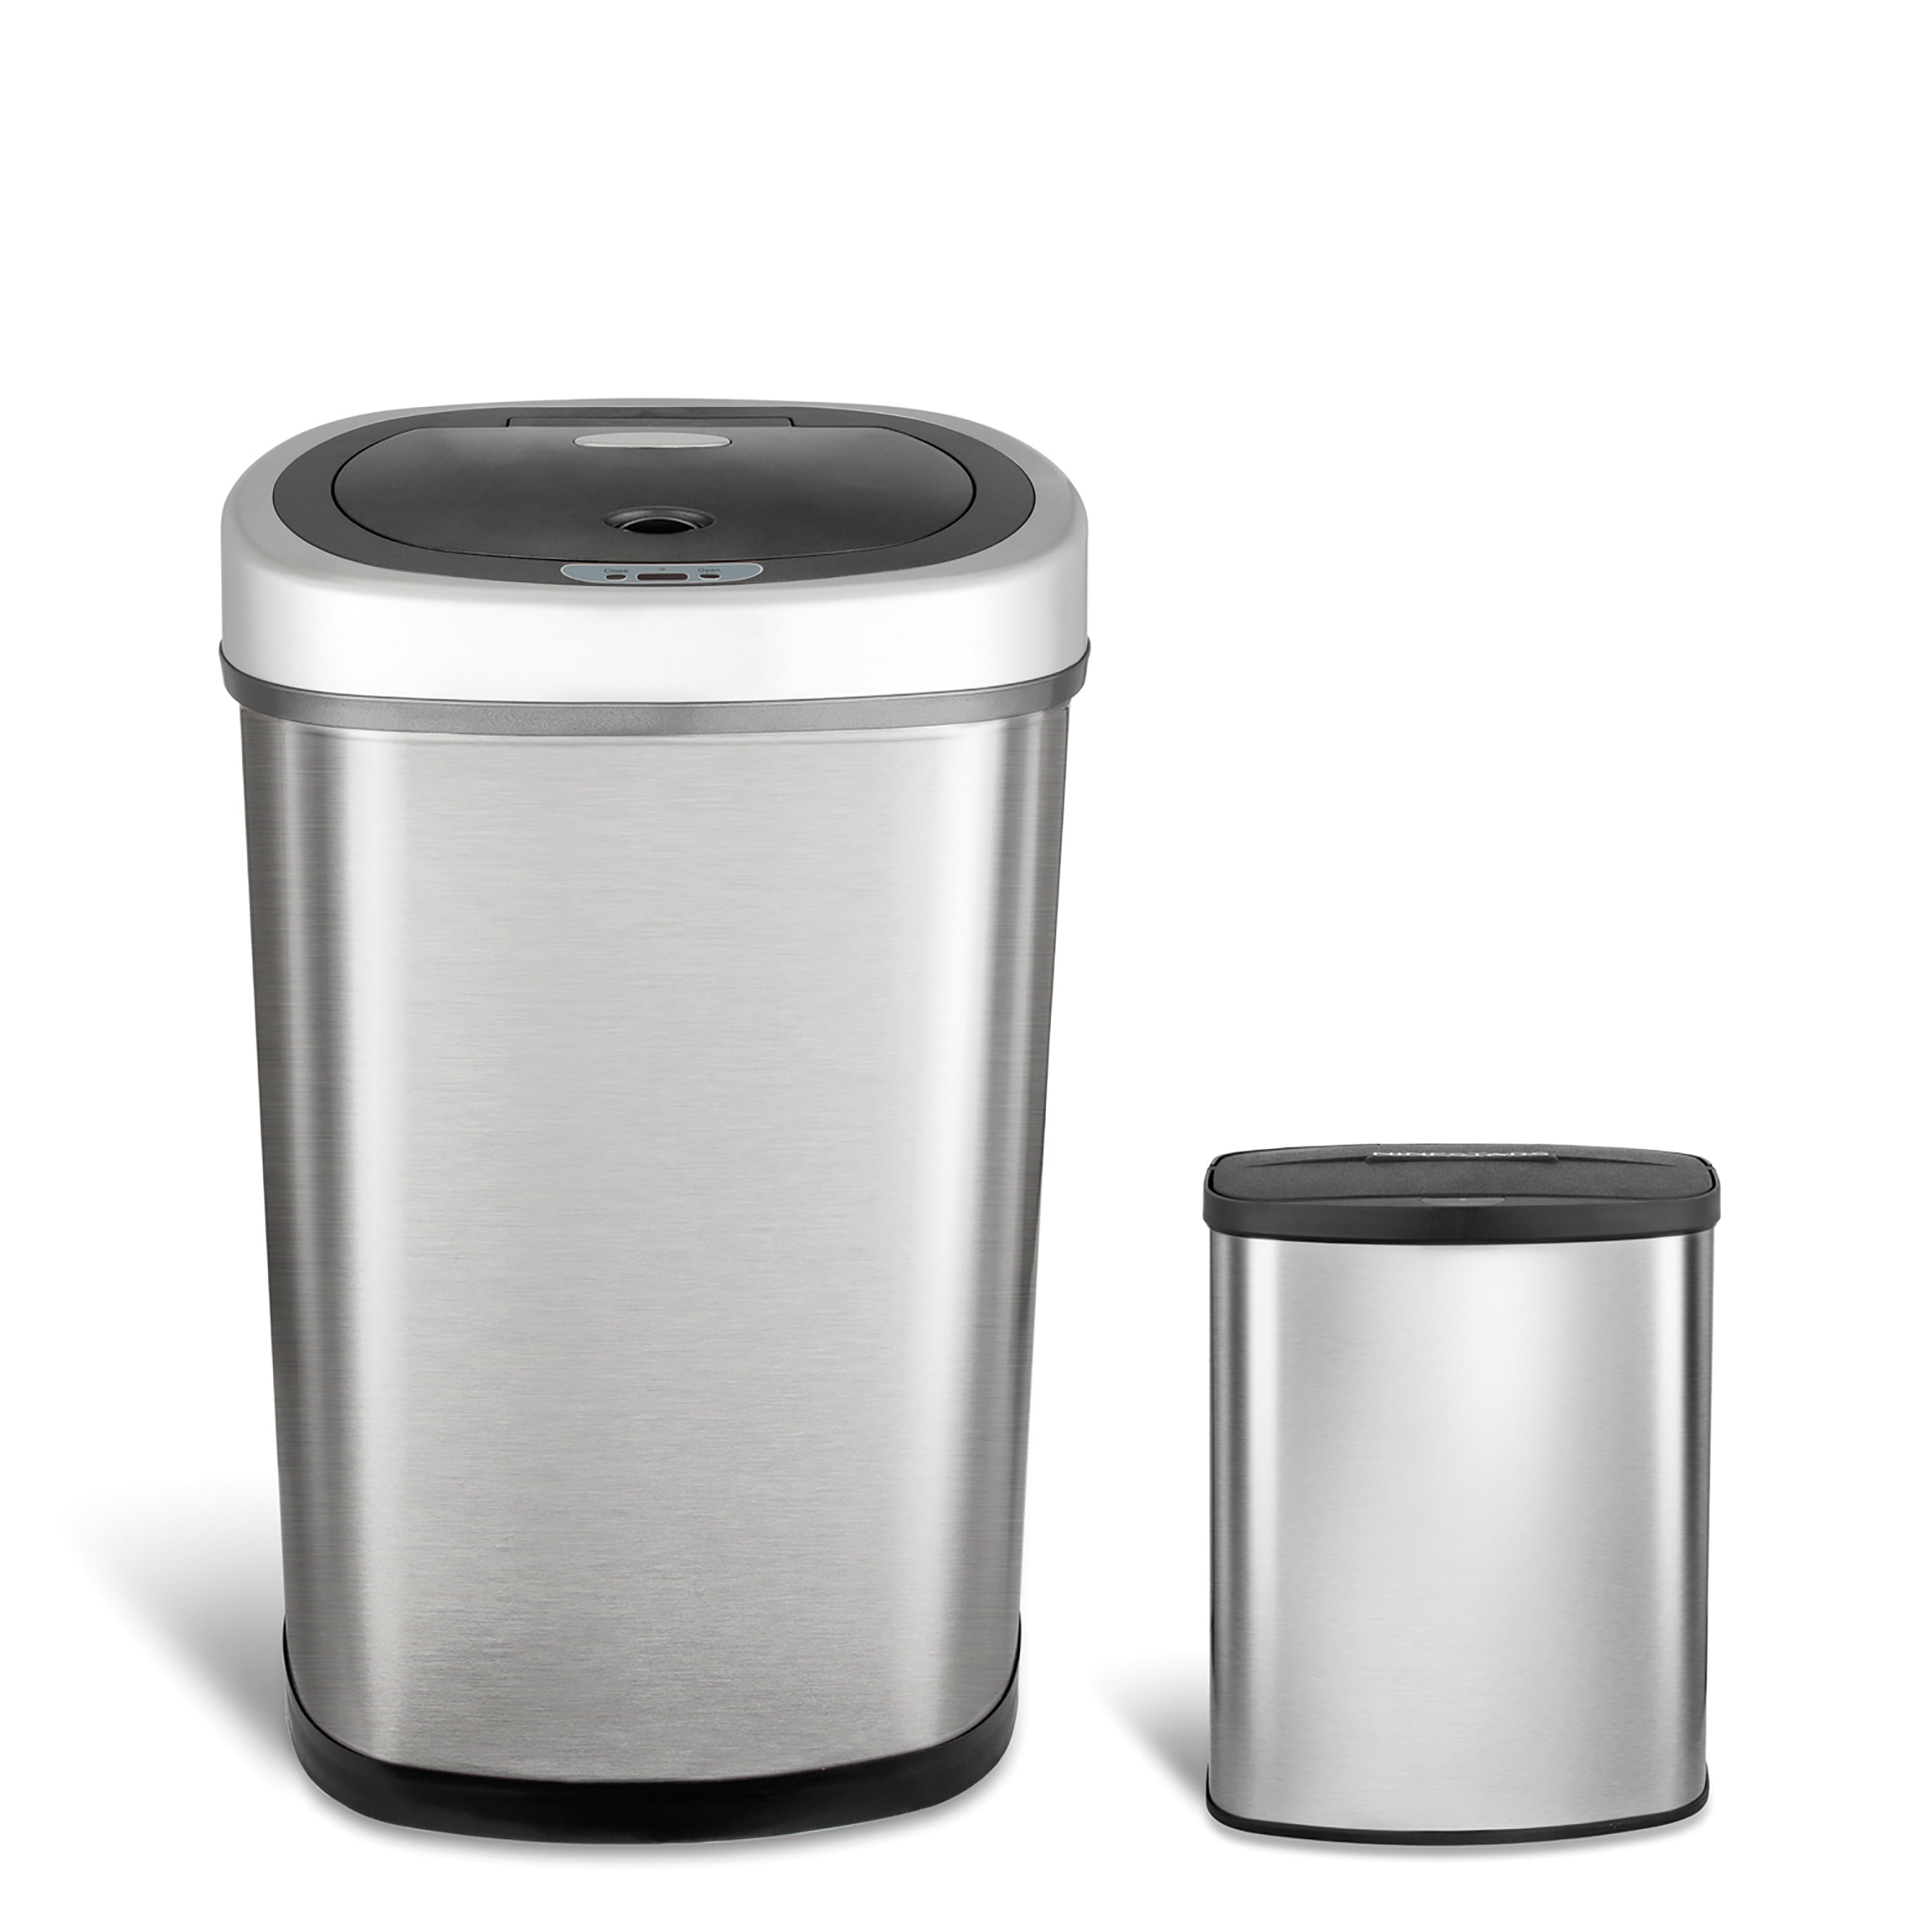 Motion Sensor Combo Touchless Trash Can Stainless Steel Garbage Storage Bin NEW 